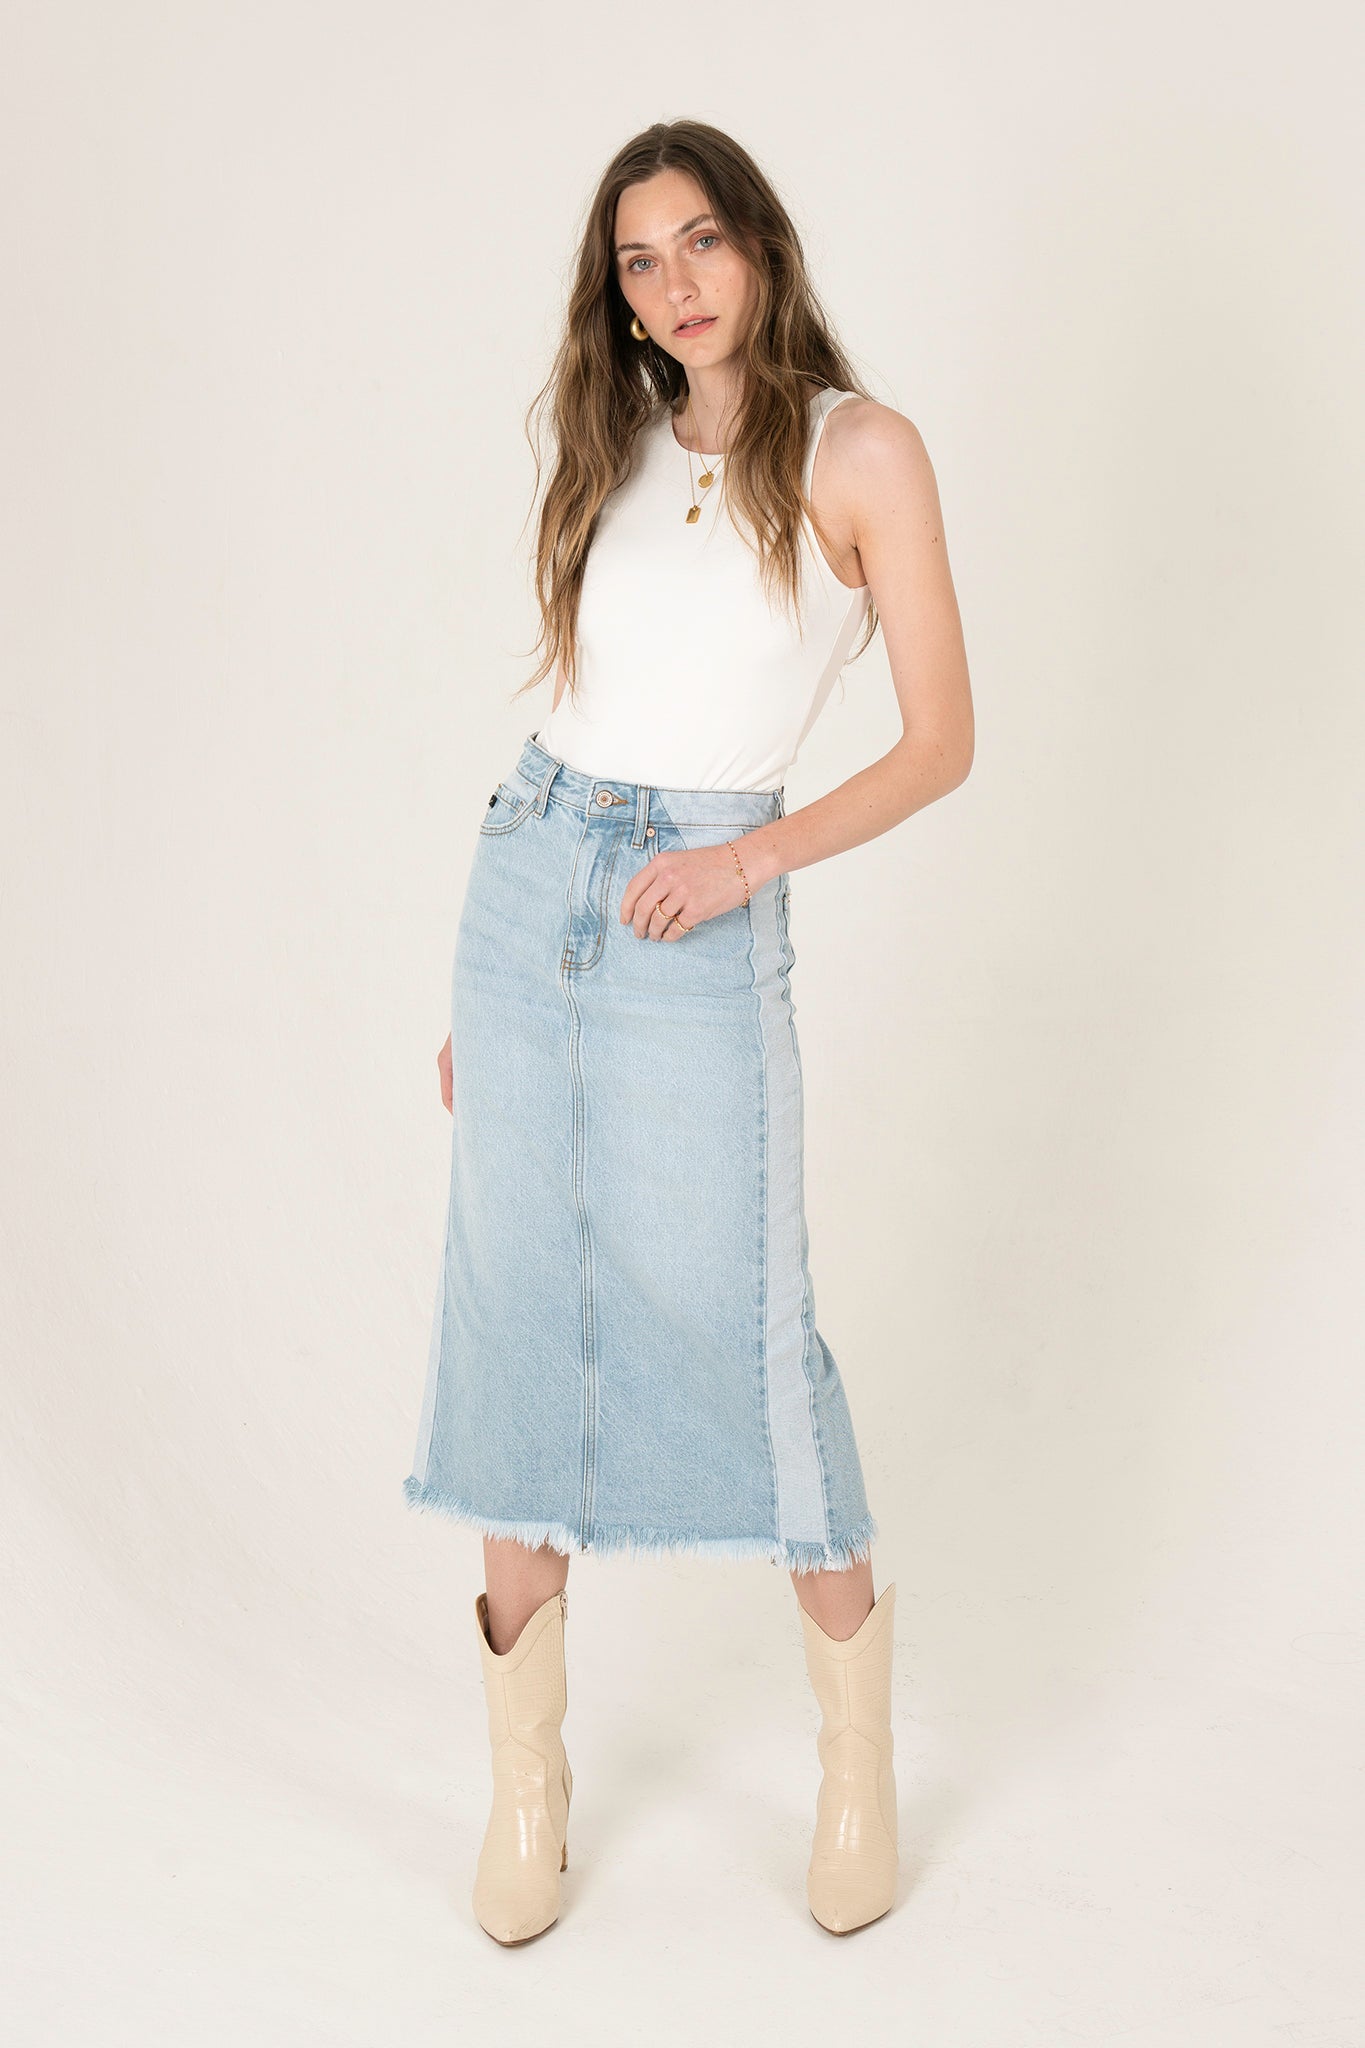 View 1 of KanCan Midi Denim Skirt, a Skirts from Larrea Cove. Detail: The KanCan Midi Denim Skirt is sure to turn heads th...